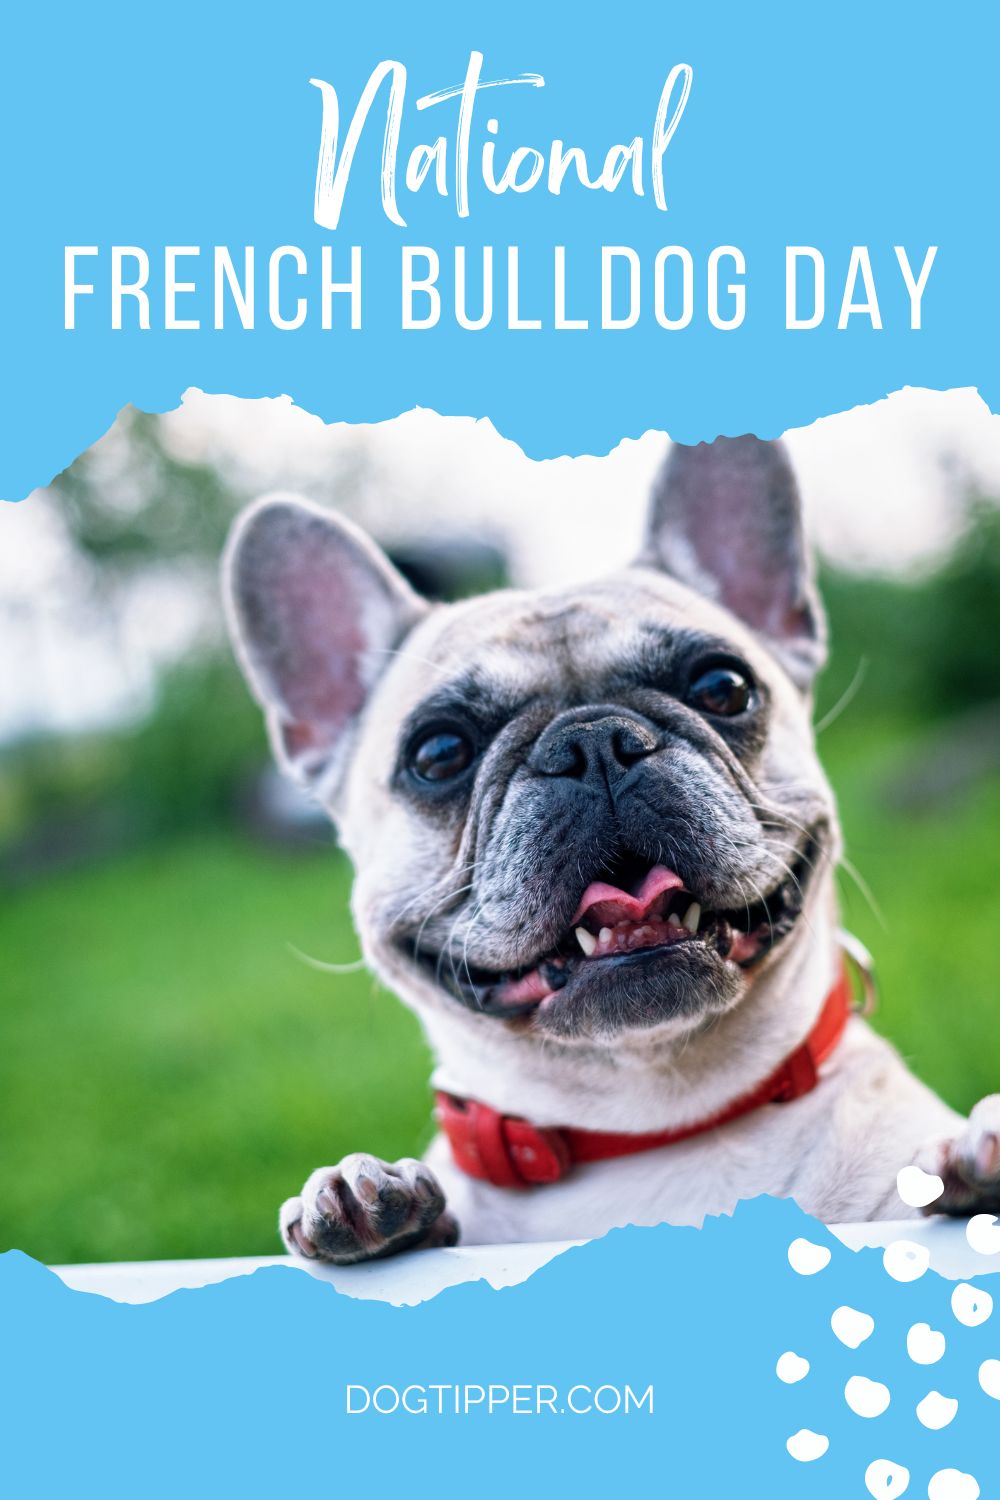 National French Bulldog Day ReportWire